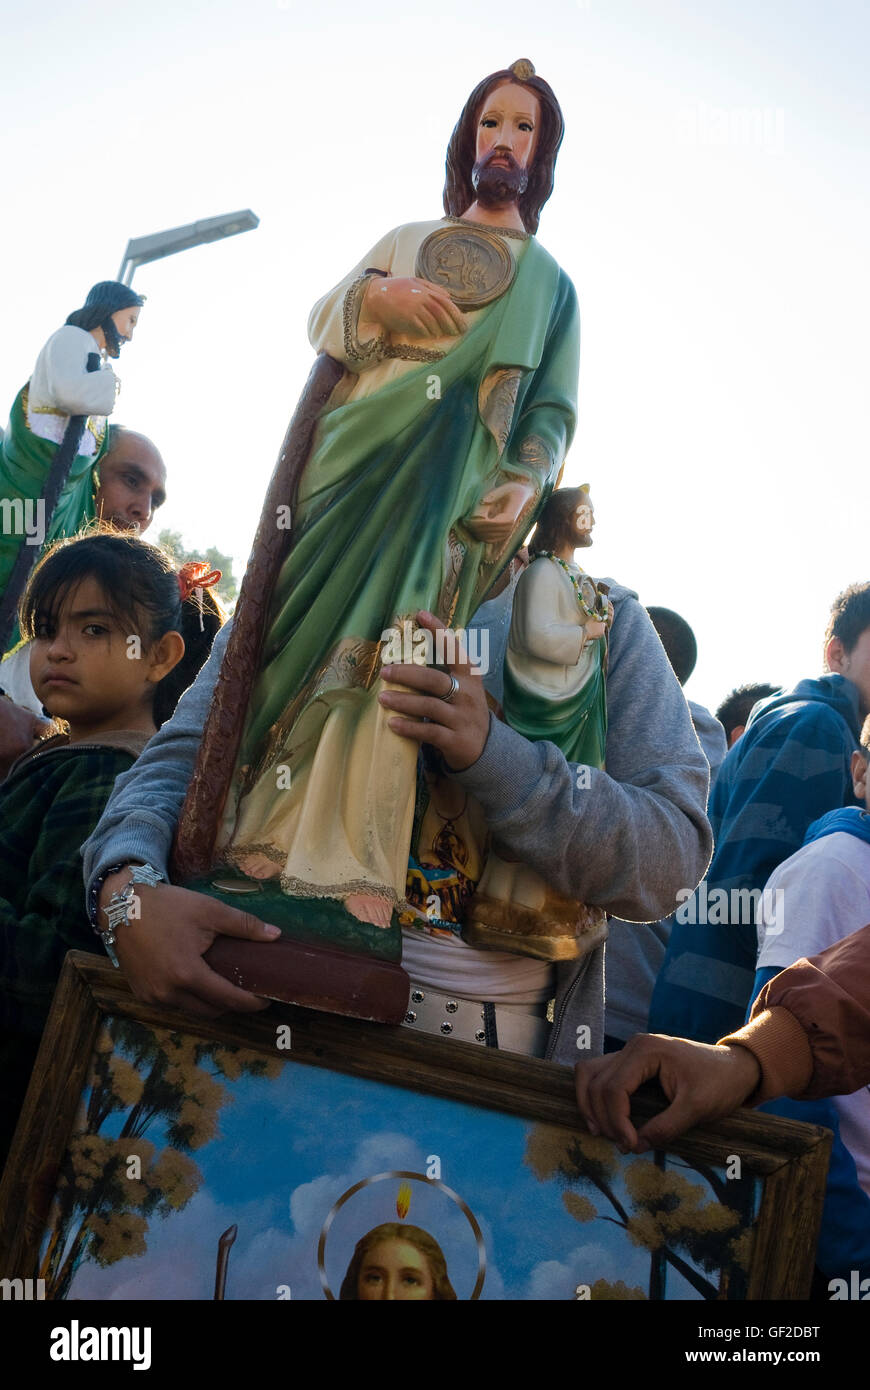 A young woman carrying statues of Saint Jude Thaddeus, the patron of lost causes, walks in a crowd on the saint's feast day. Stock Photo